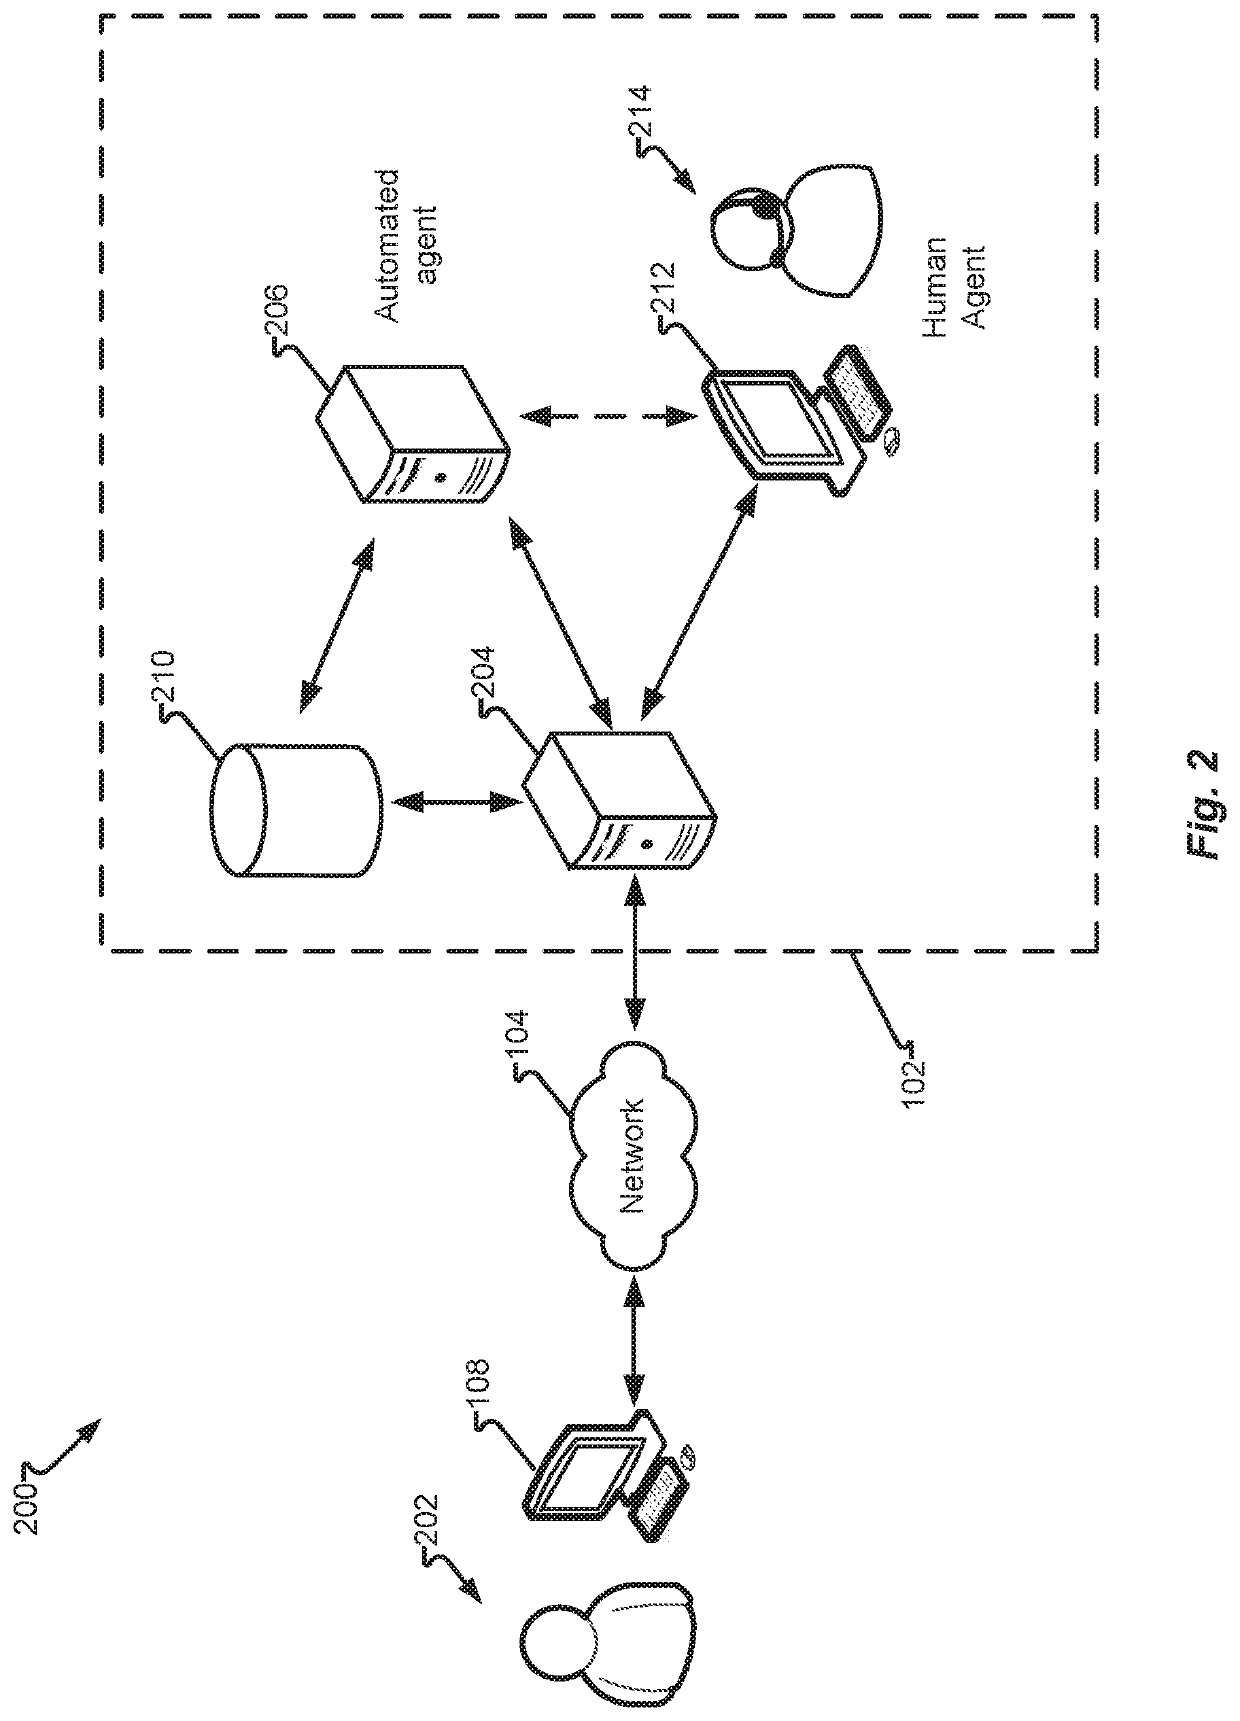 Systems and methods for adaptive emotion based automated emails and/or chat replies